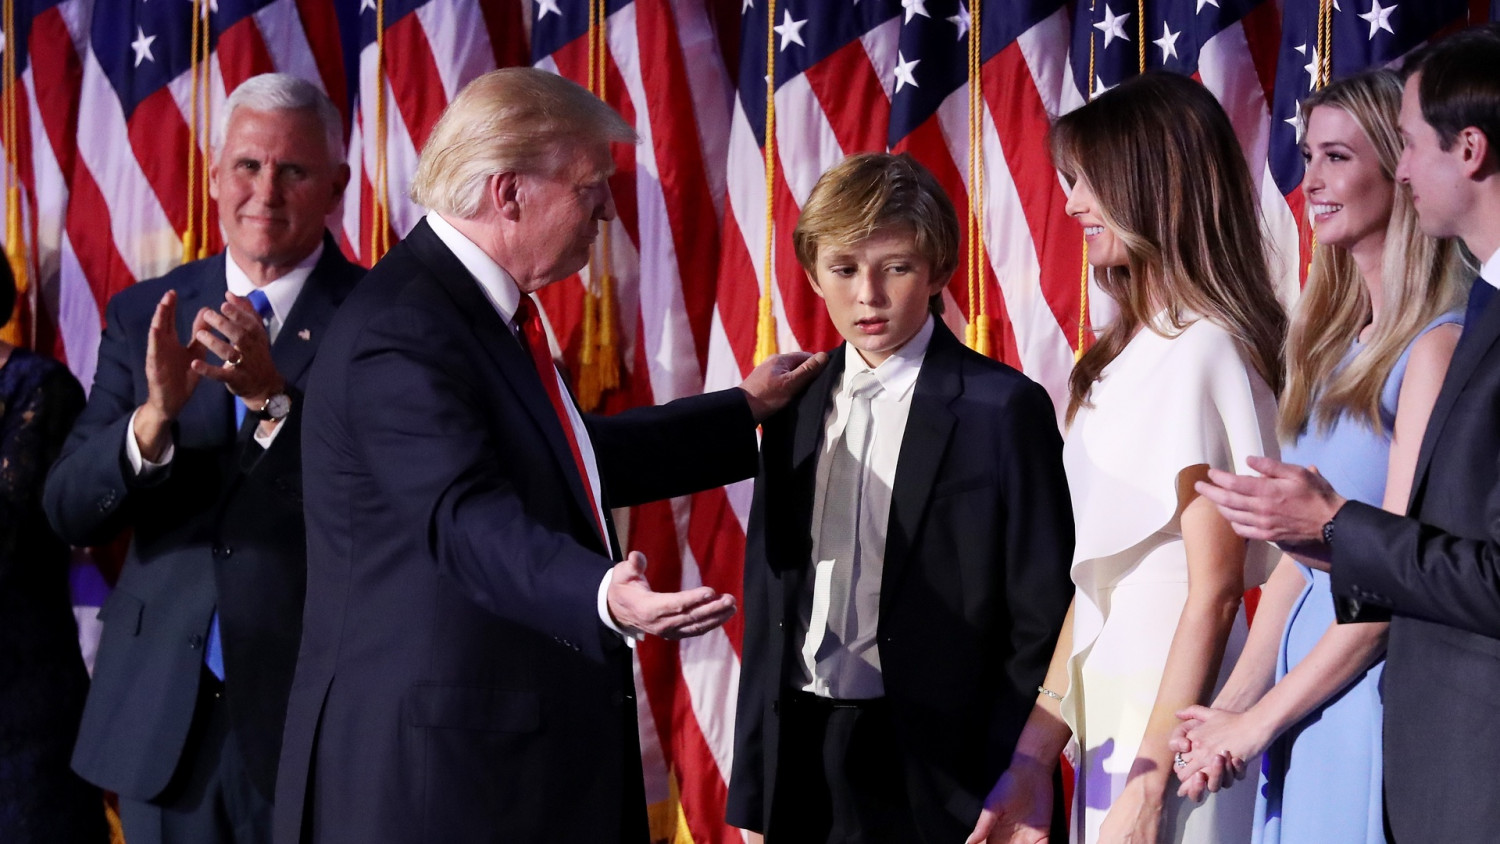 Impeachment Witness Jokes About Barron Trump’s Name, Is Criticized by Trump Campaign